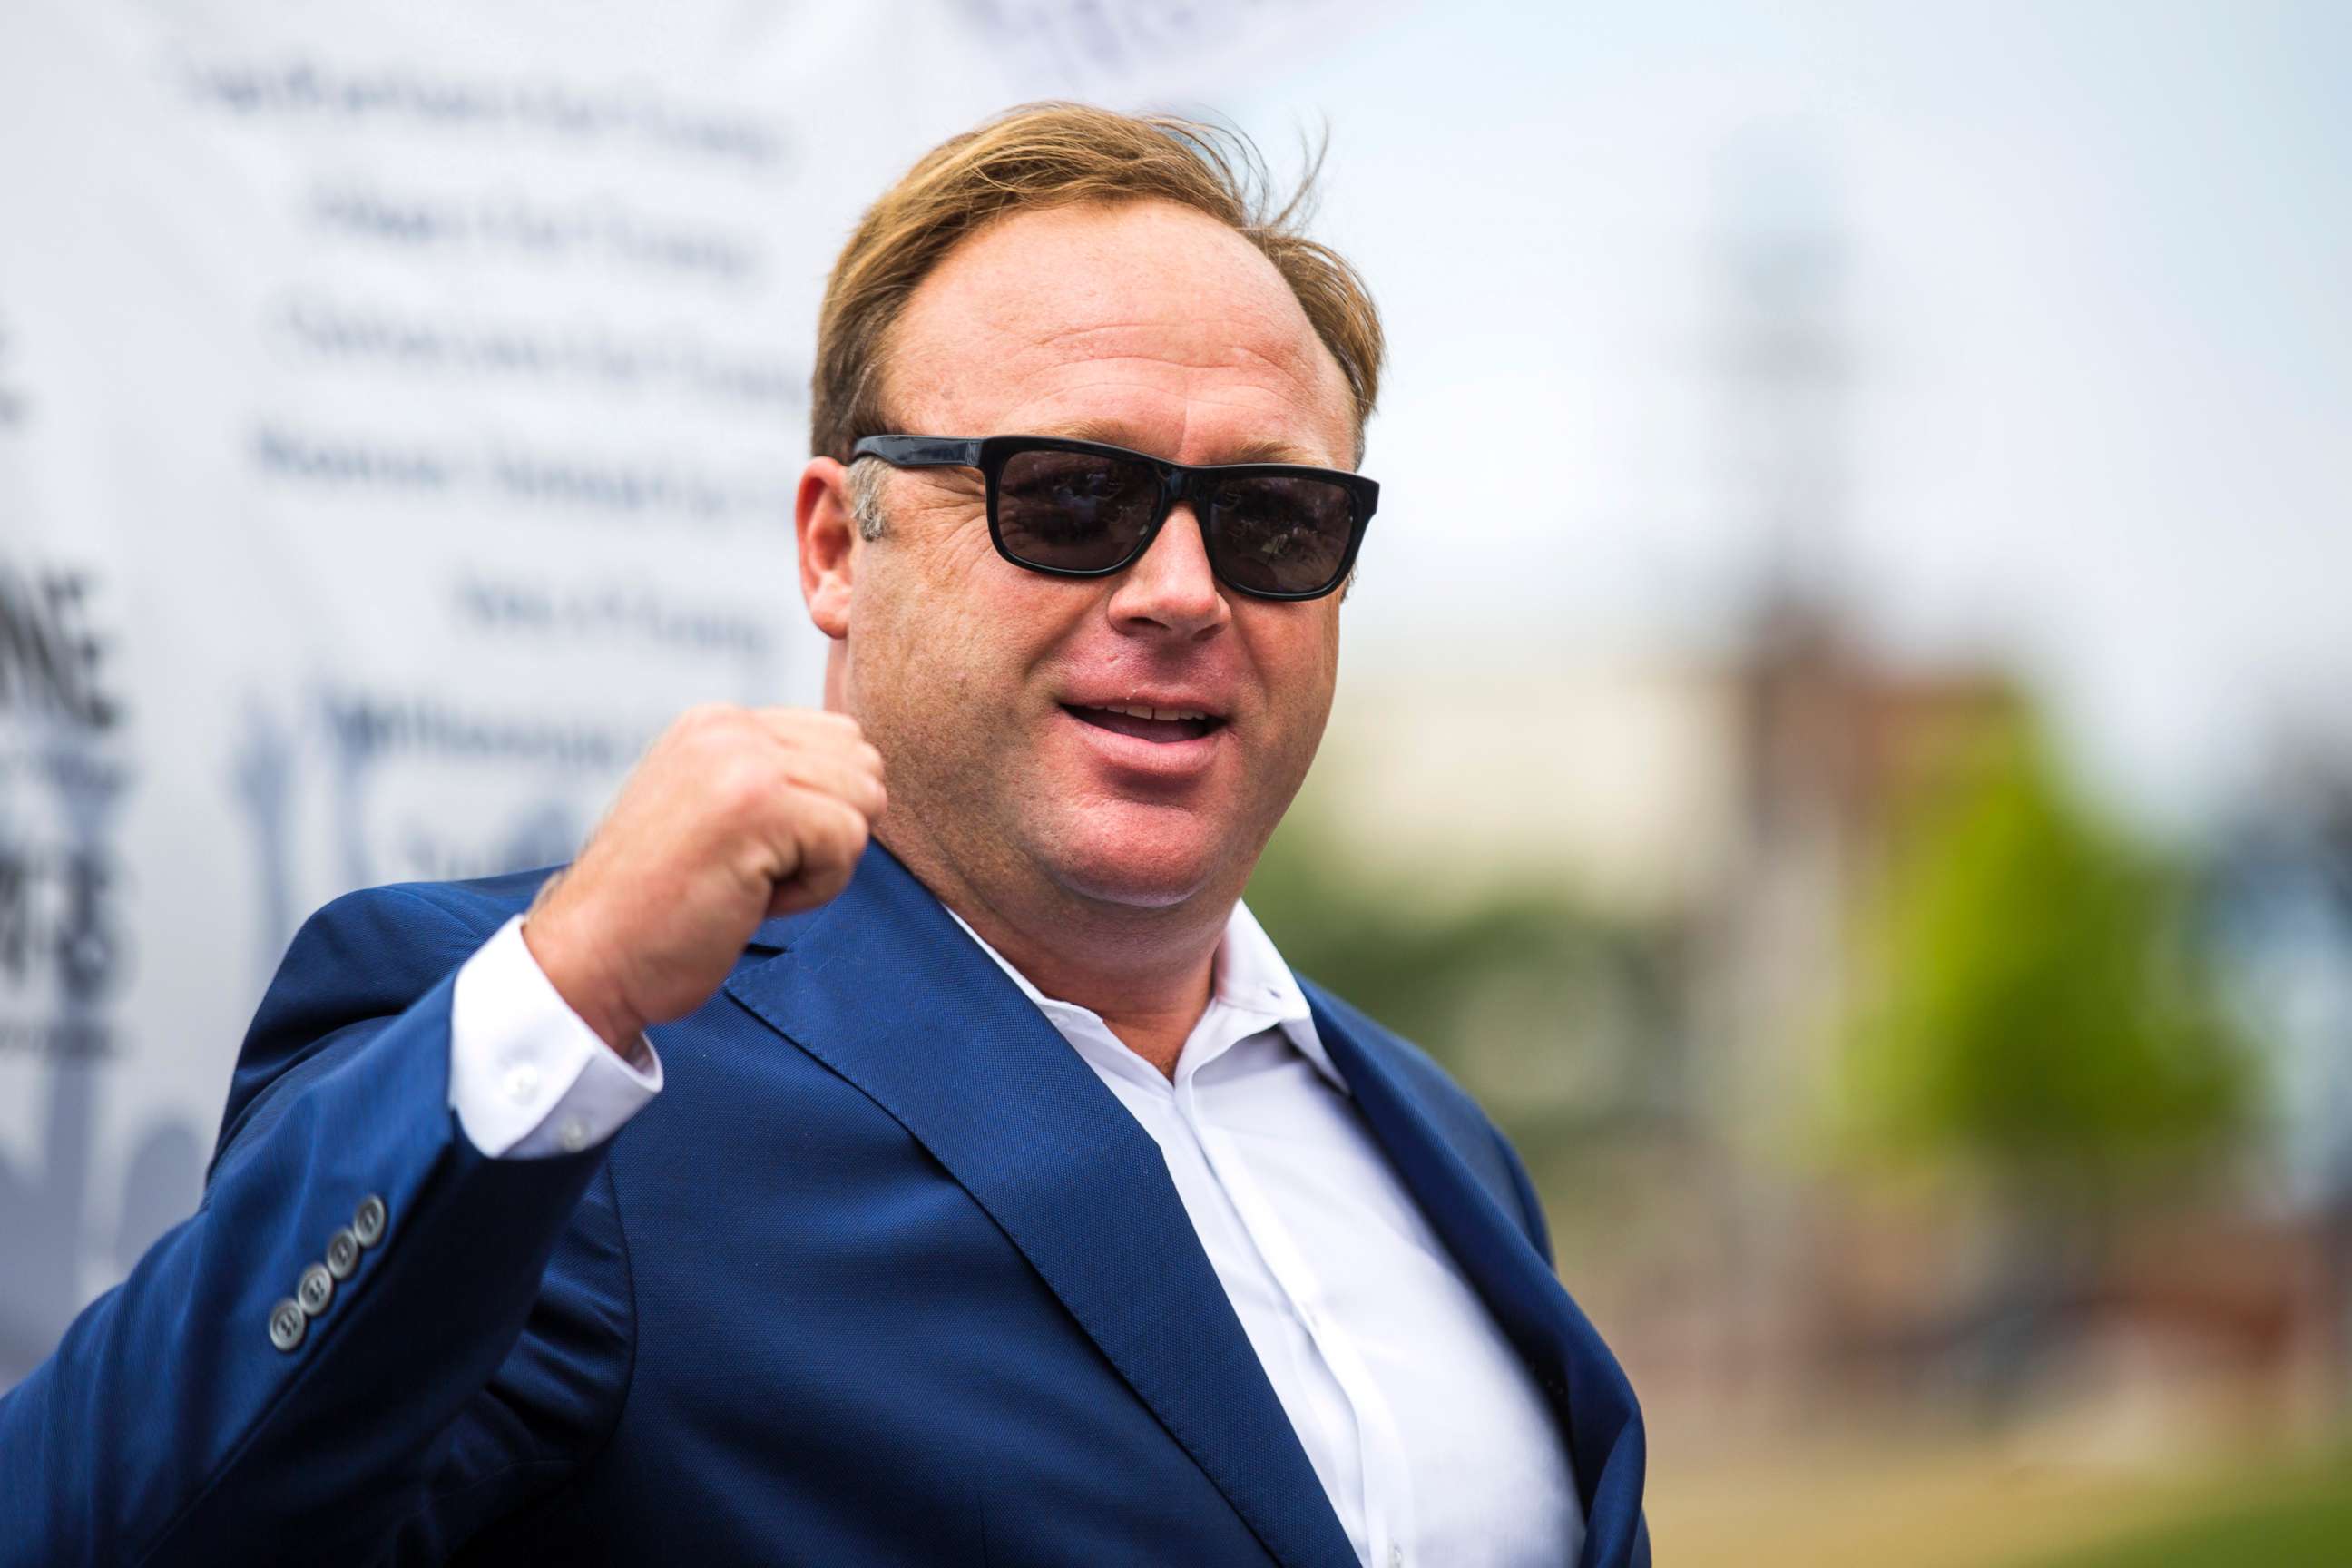 PHOTO: Radio talk show host Alex Jones speaks during a rally in support of Donald Trump near the Republican National Convention, July 18, 2016, in Cleveland, Ohio.